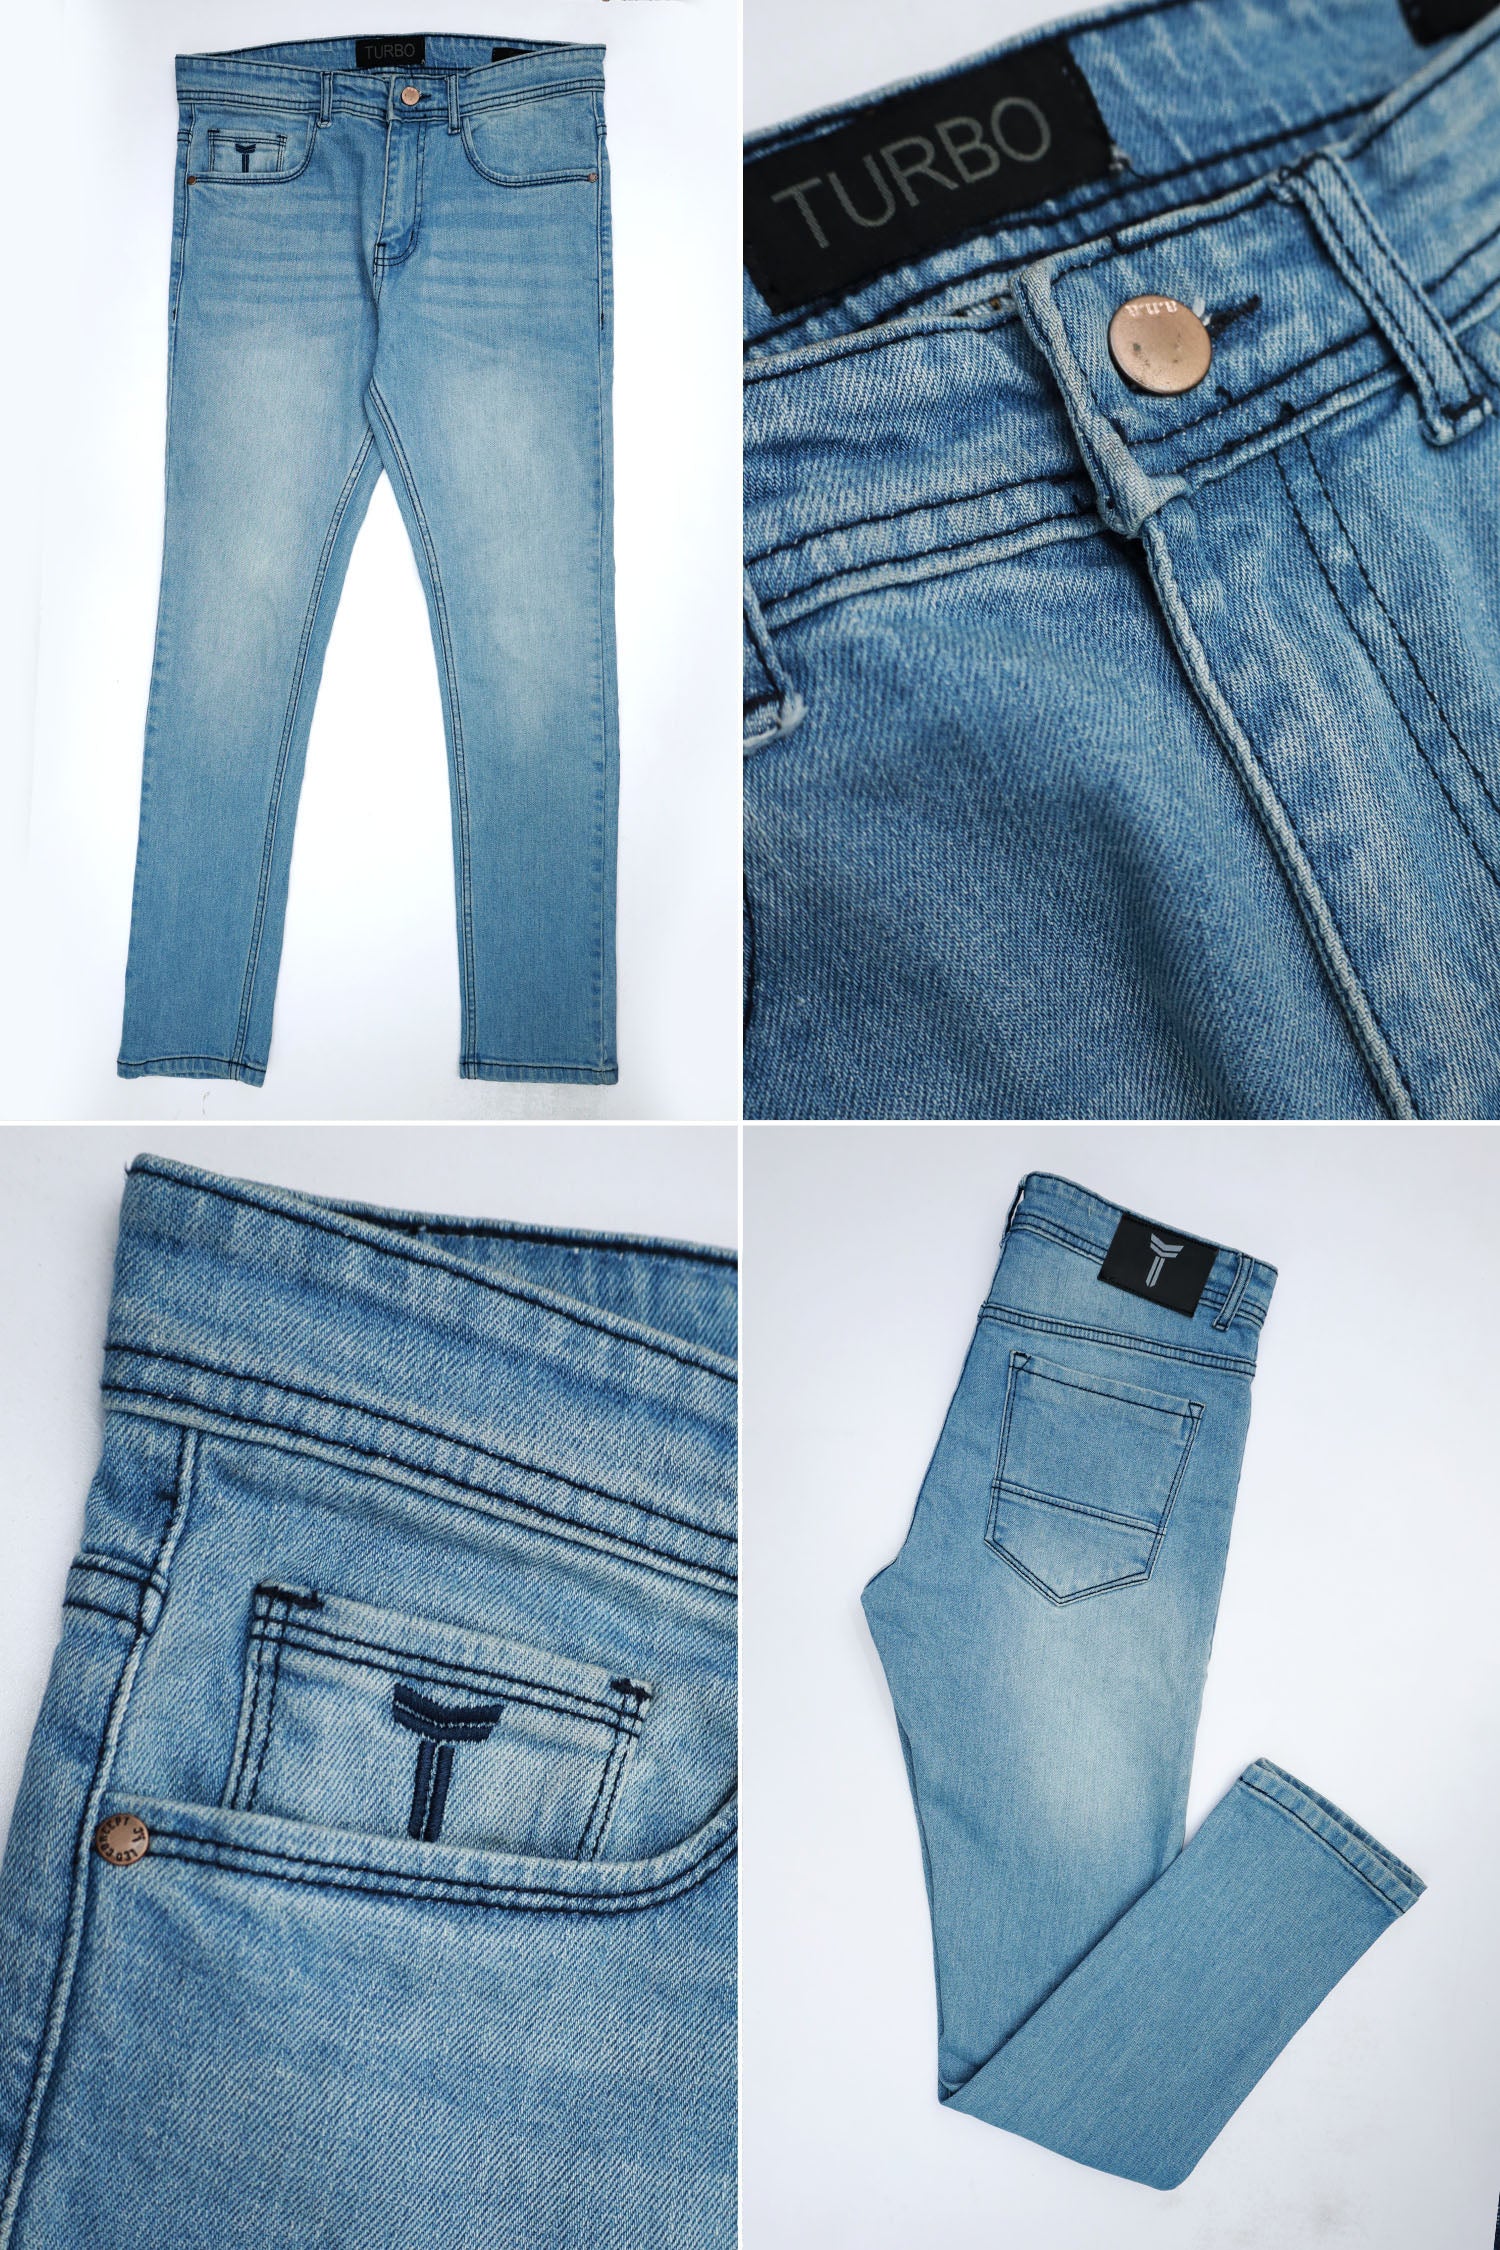 Faded Style Slim Fit Turbo Jeans In Ice Blue